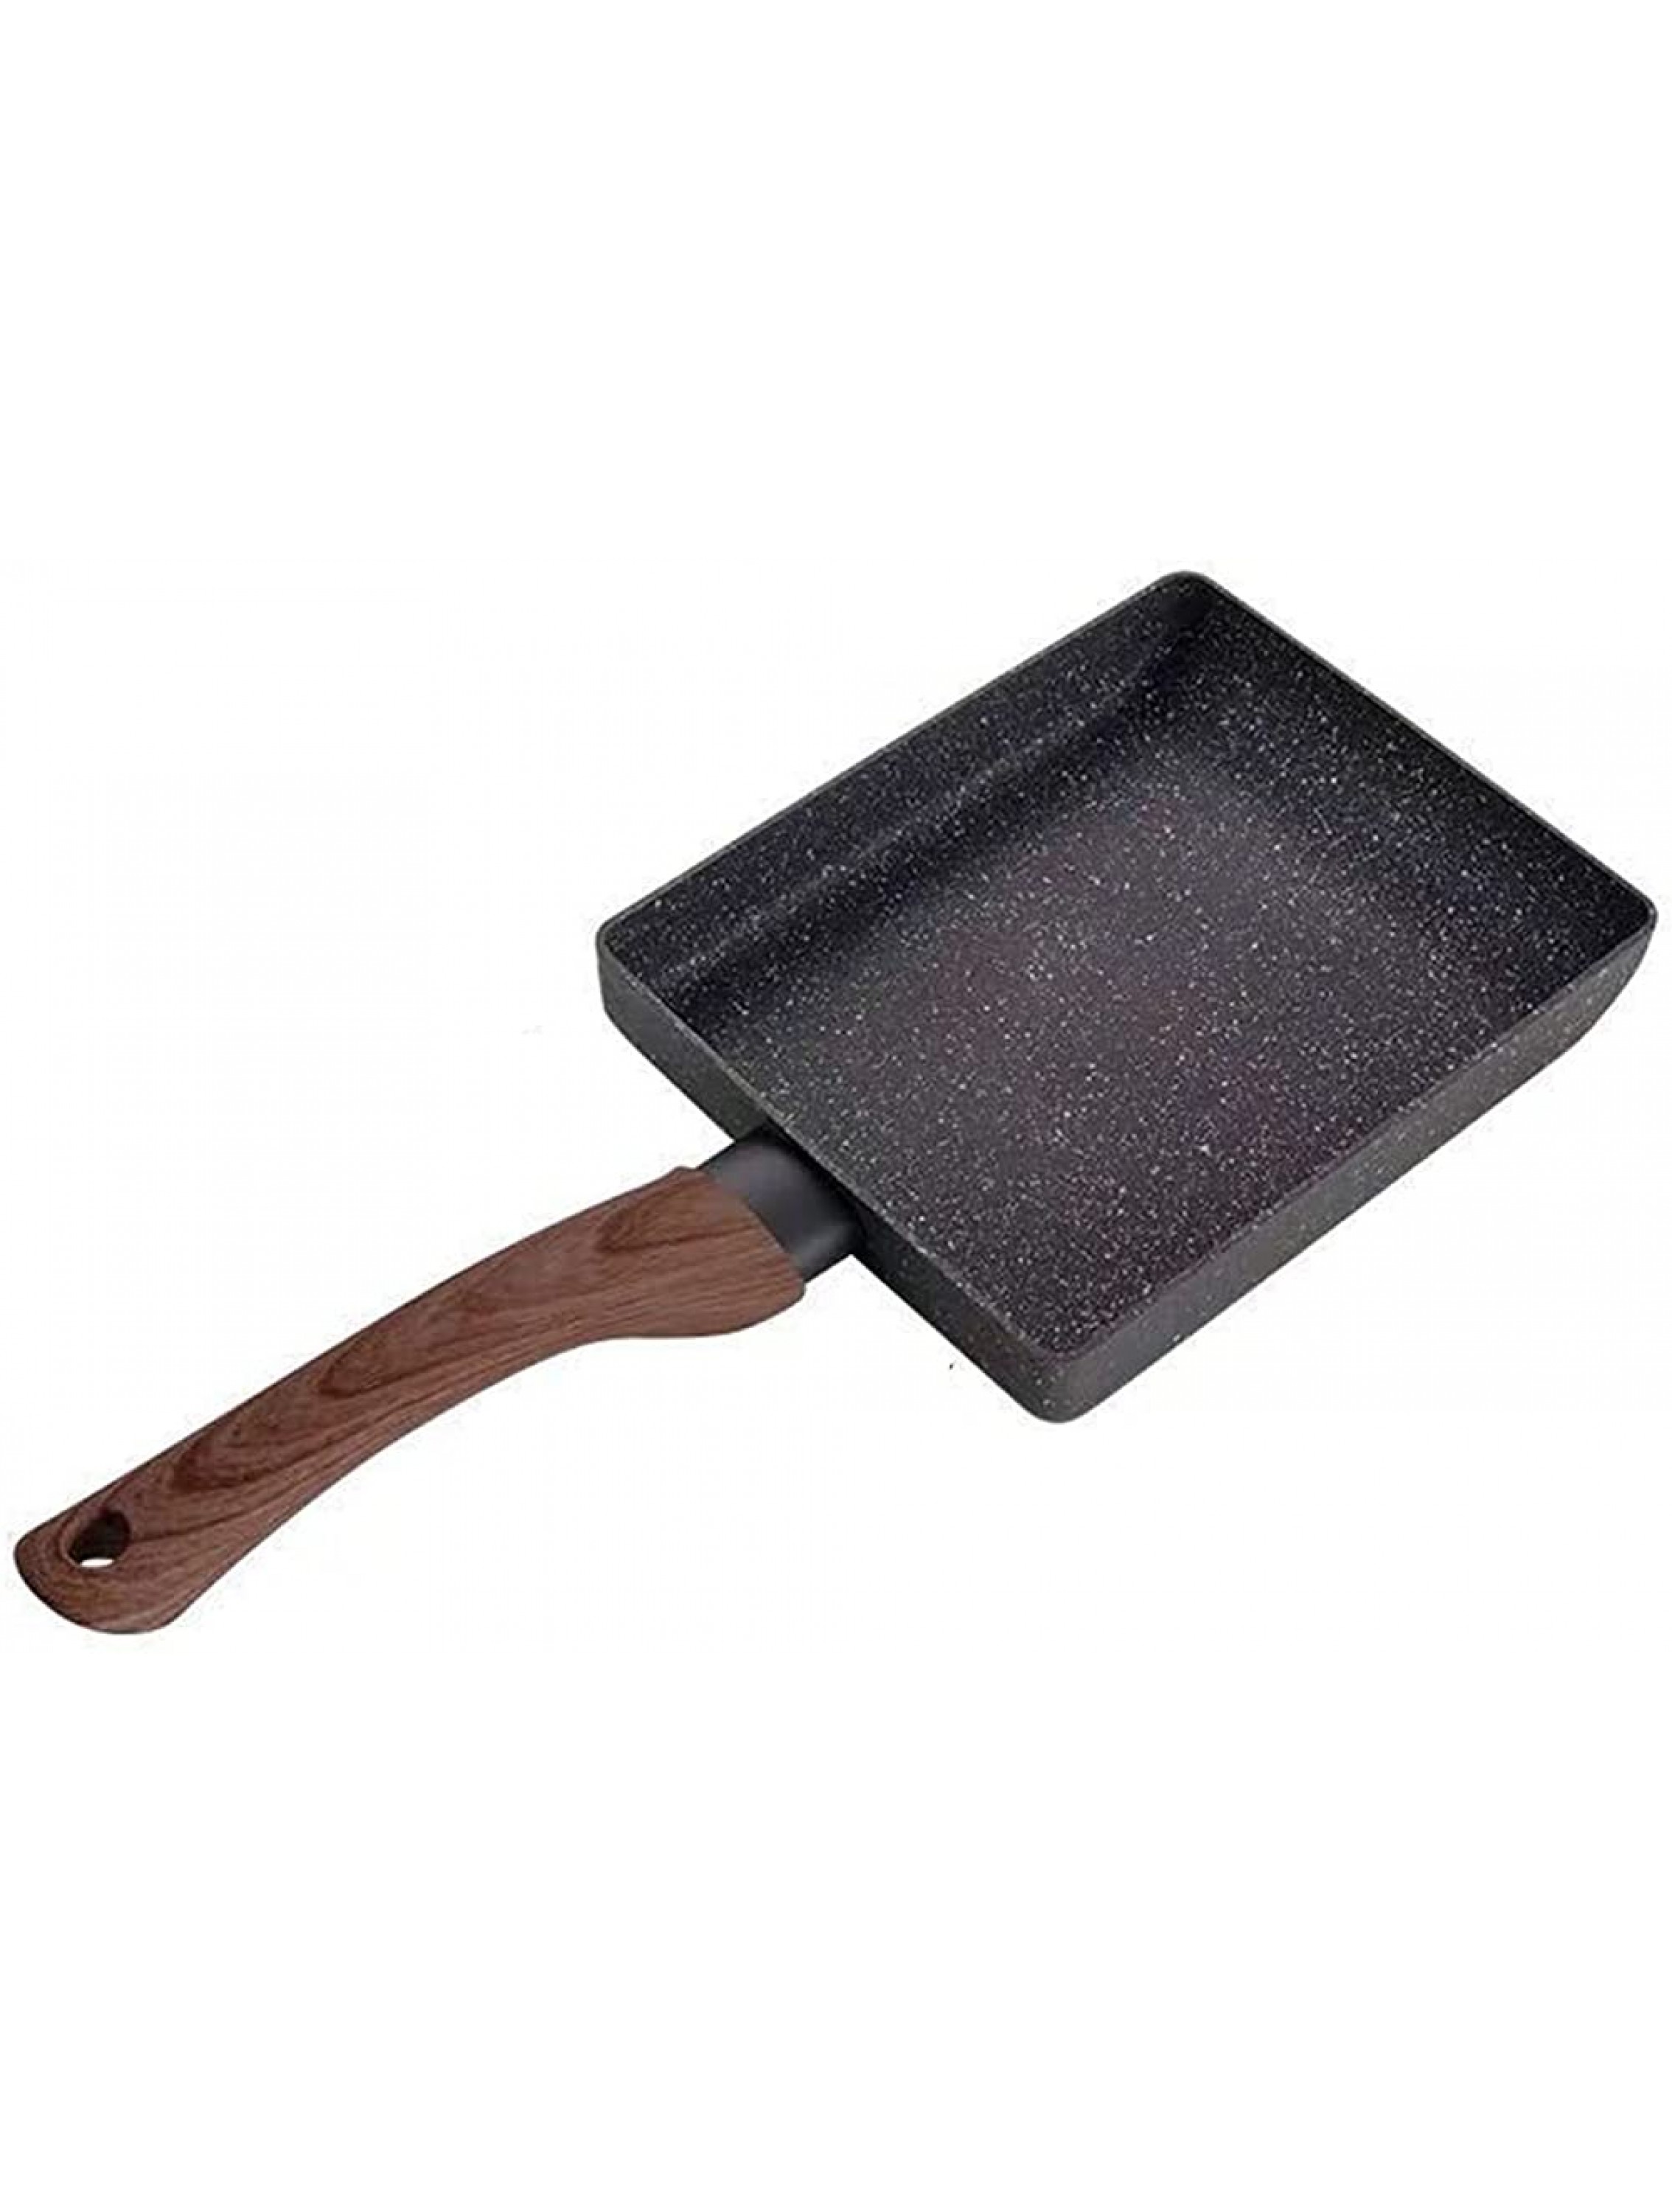 Eervff Non-stick Flat-bottomed Thick Pan With Egg Bake Mould Square Mini Frying Pan18.615.52.9CM - B43ZN86HR